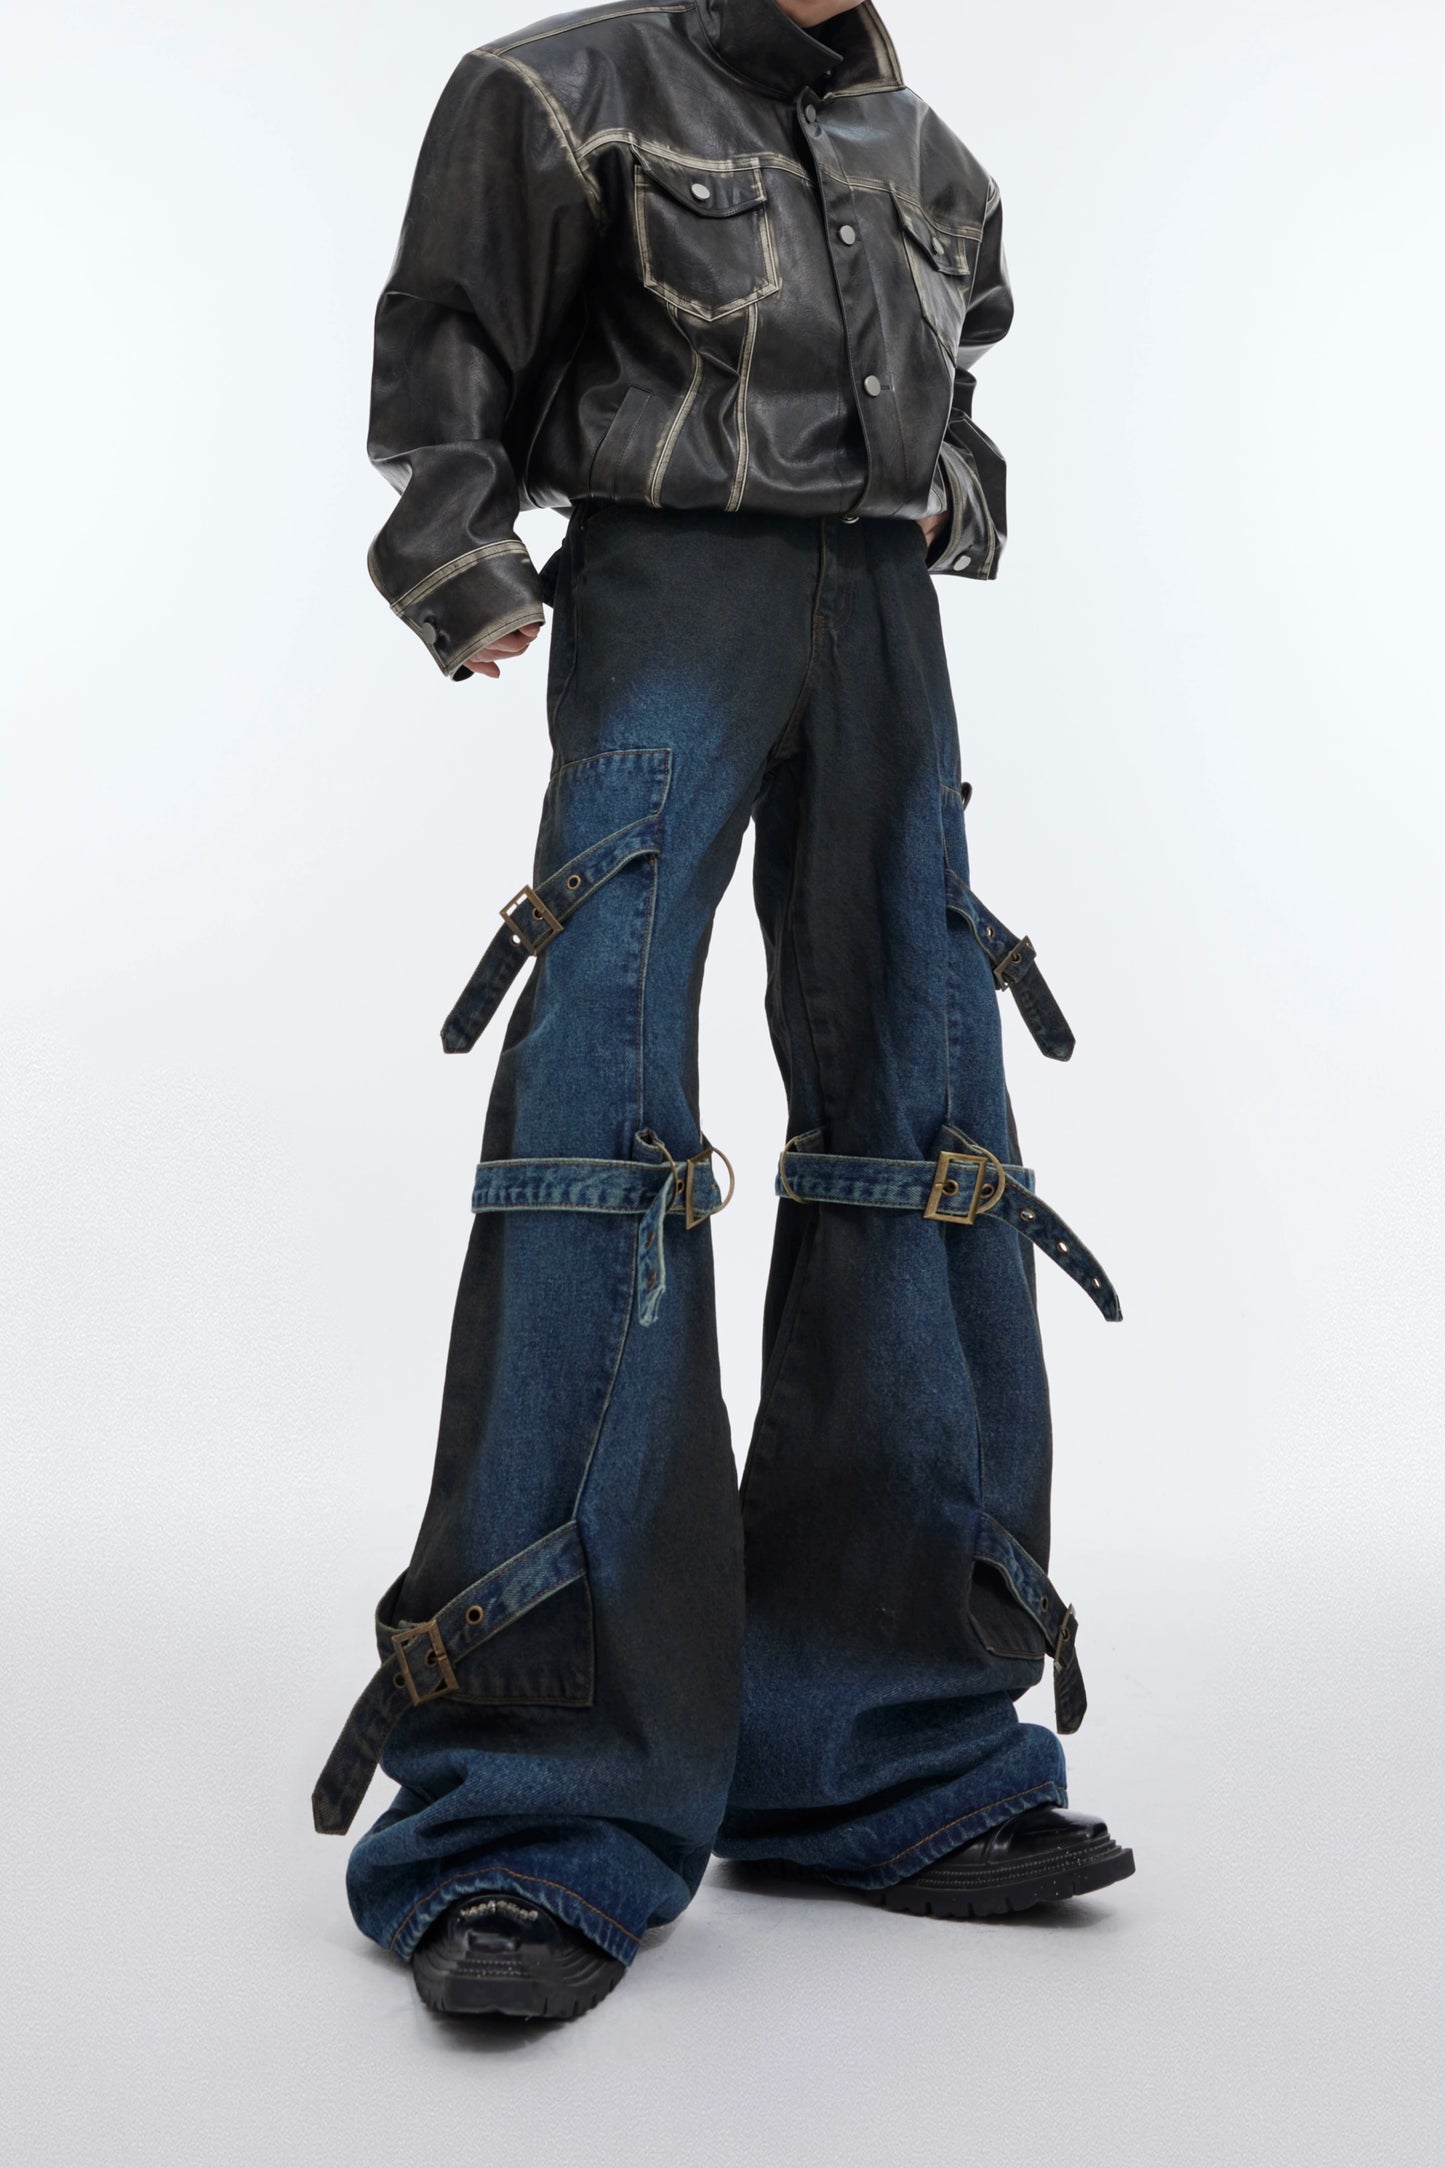 CulturE is a heavyweight deconstructed retro lace-up design bootcut jeans and niche metal snap-fastened casual pants